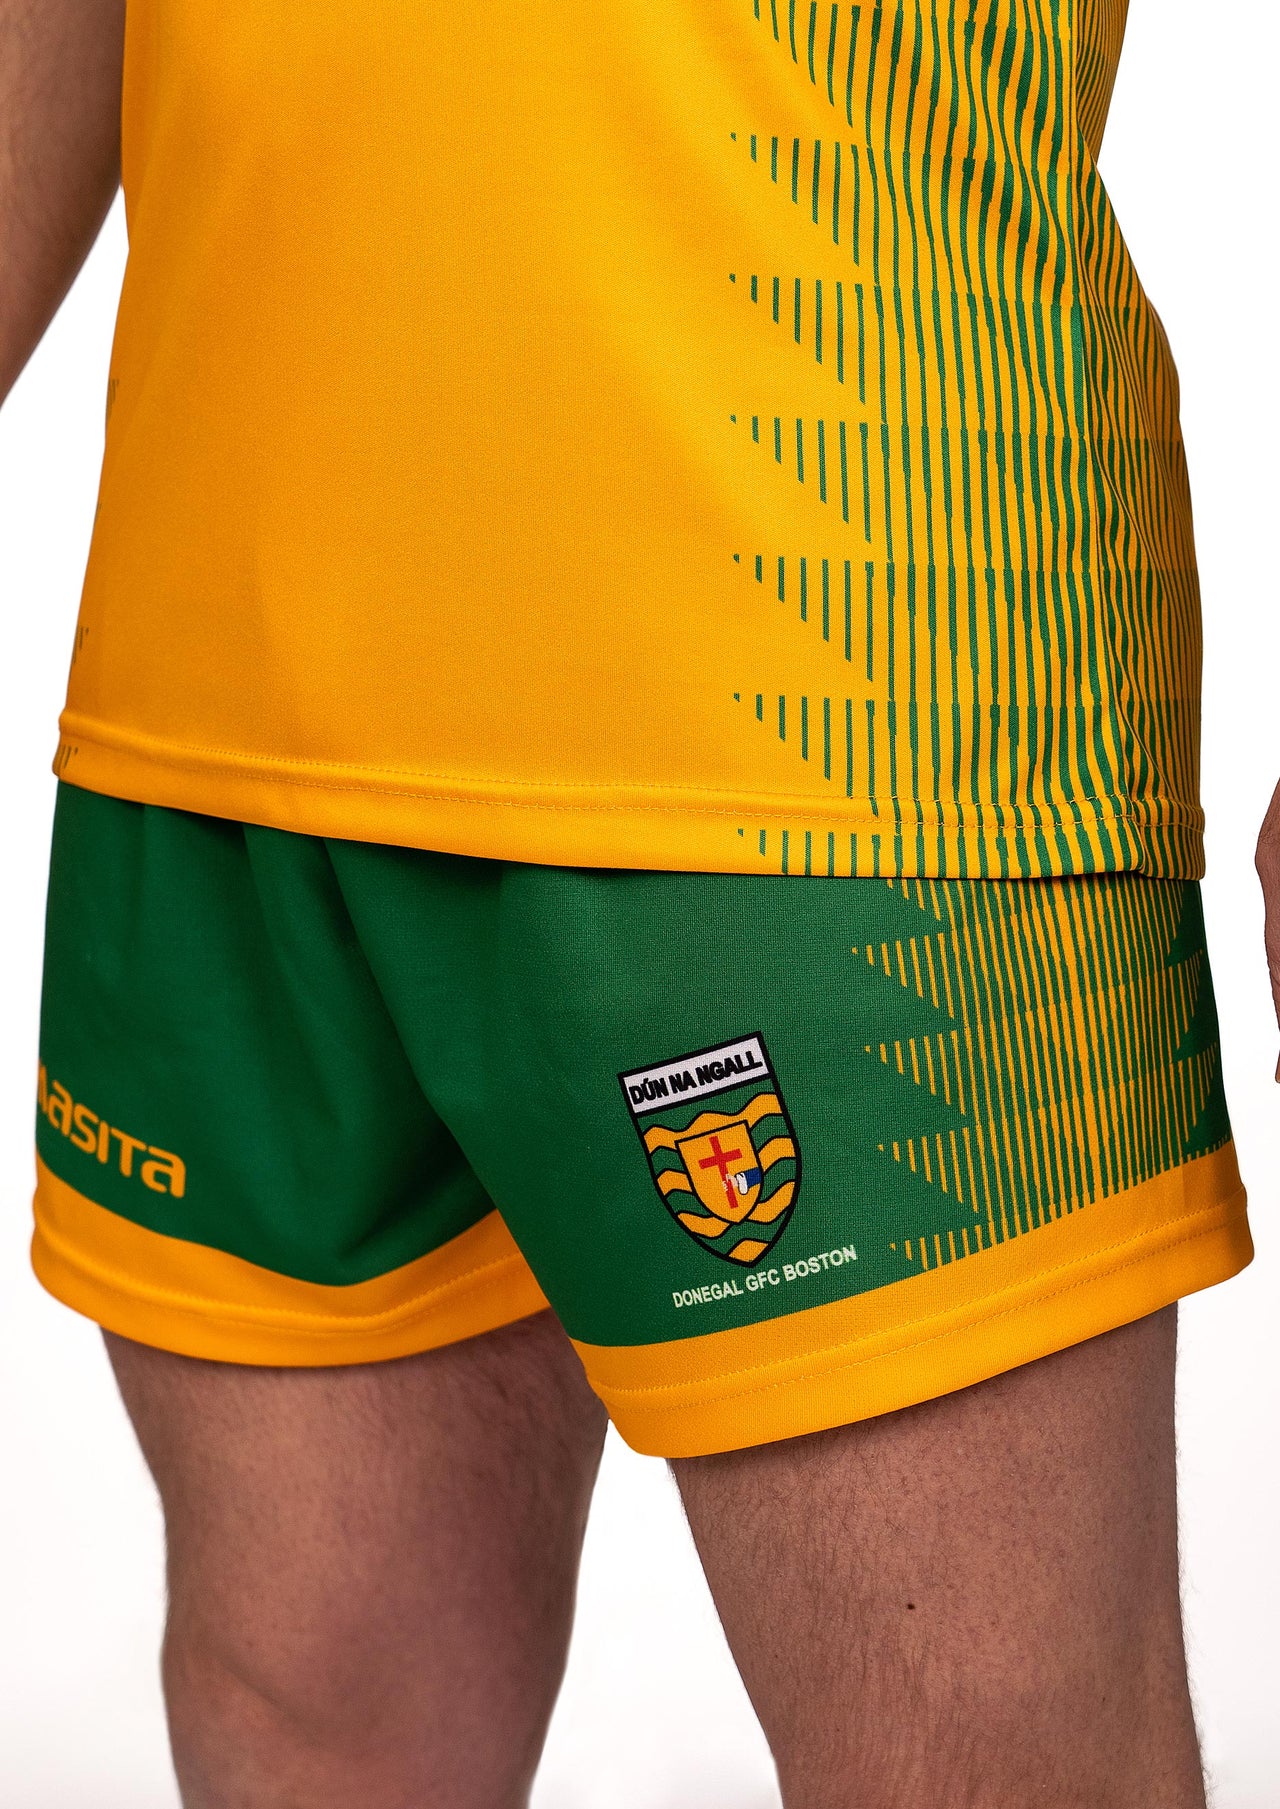 Donegal Boston Shorts Adult